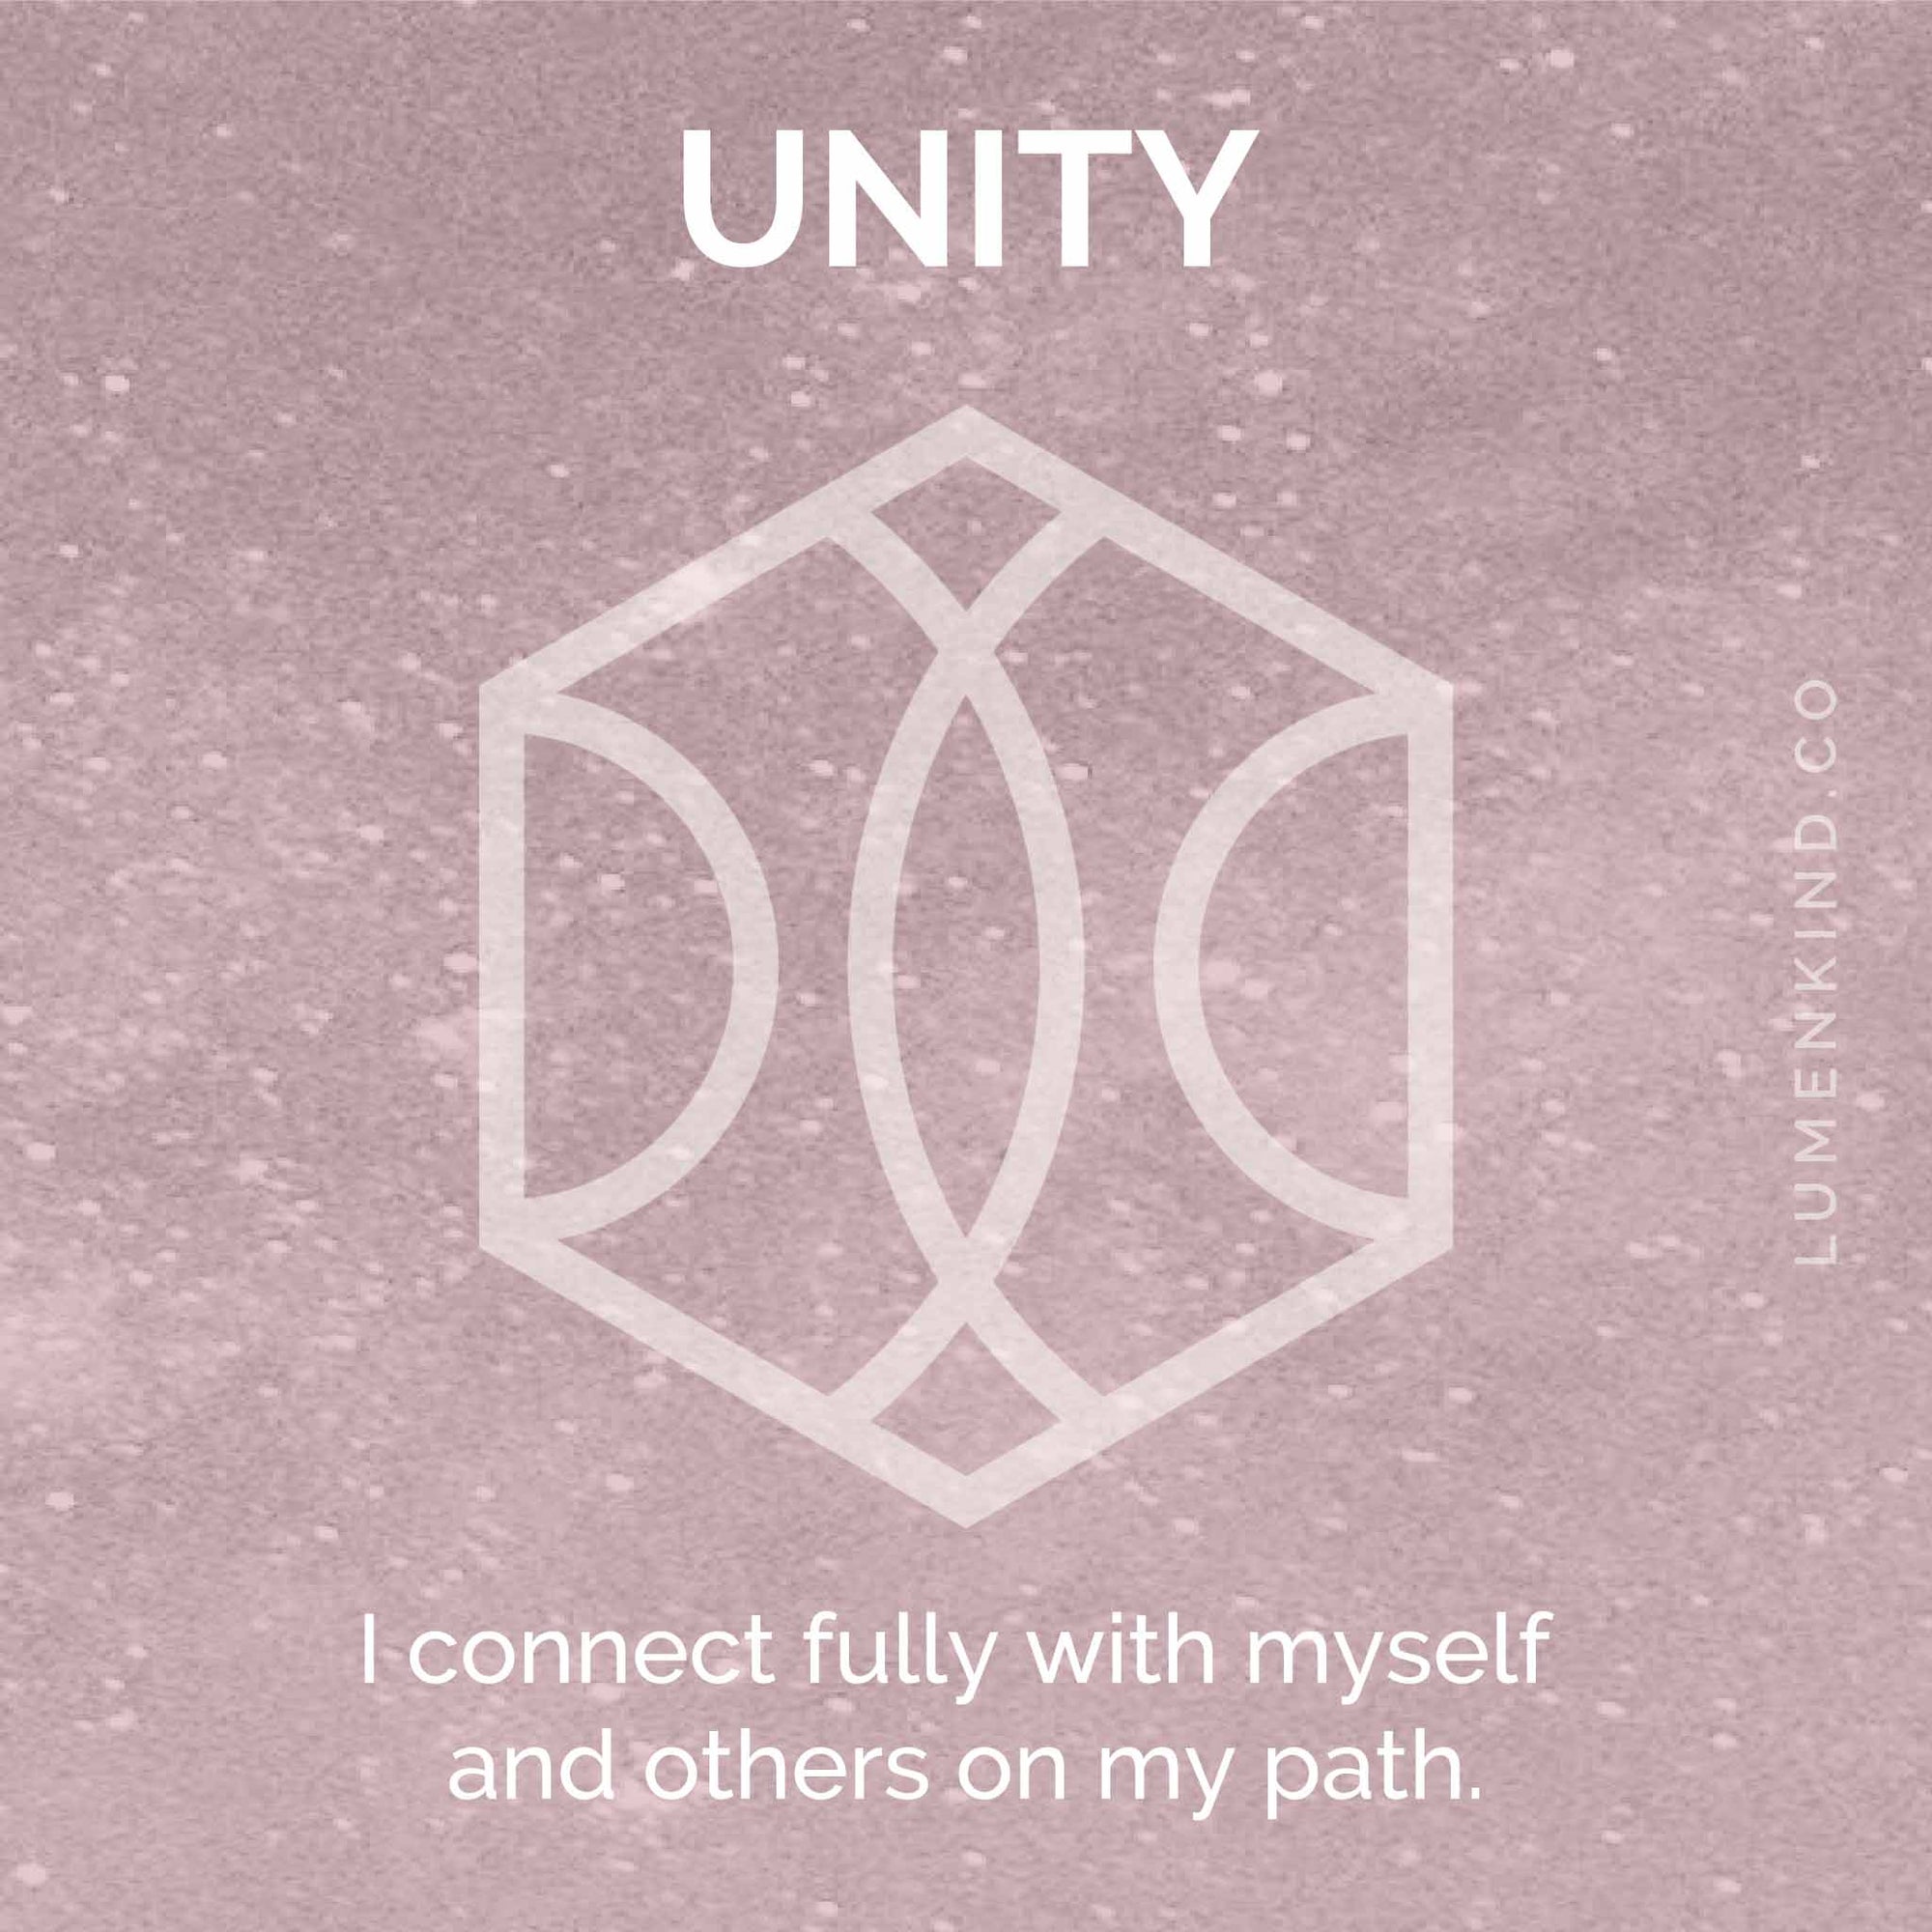 The suggested intention is UNITY. I connect fully with myself and others on my path.